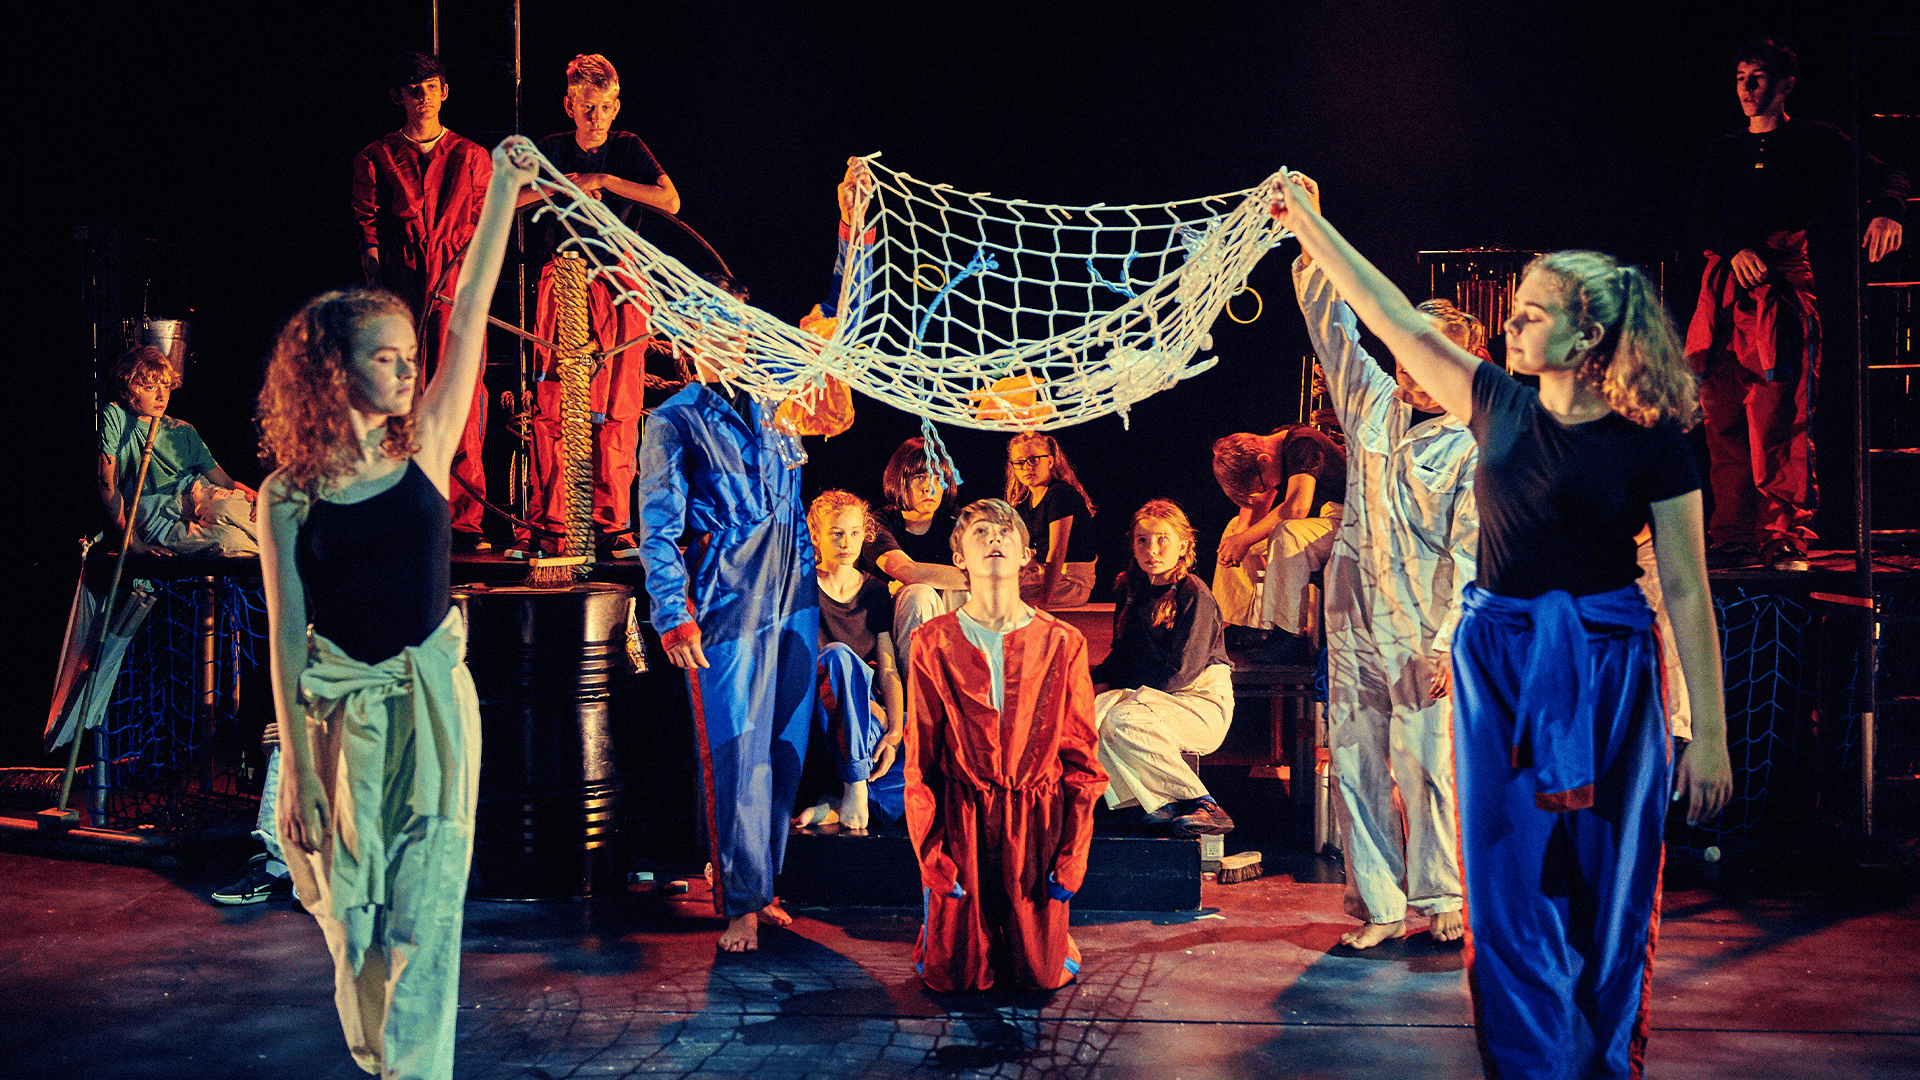 Background: Northcott stage. Black curtain backdrop. Set: Table staging. Oil barrels, nets and wind chimes. Foreground: Two performers wearing green (left) and blue (right) jumpsuits ted at their waists hold a net over another performer wearing a red jumpsuit. Behind them, a large group of performers, wearing black shirts and different coloured trousers, watch from different positions on the set.